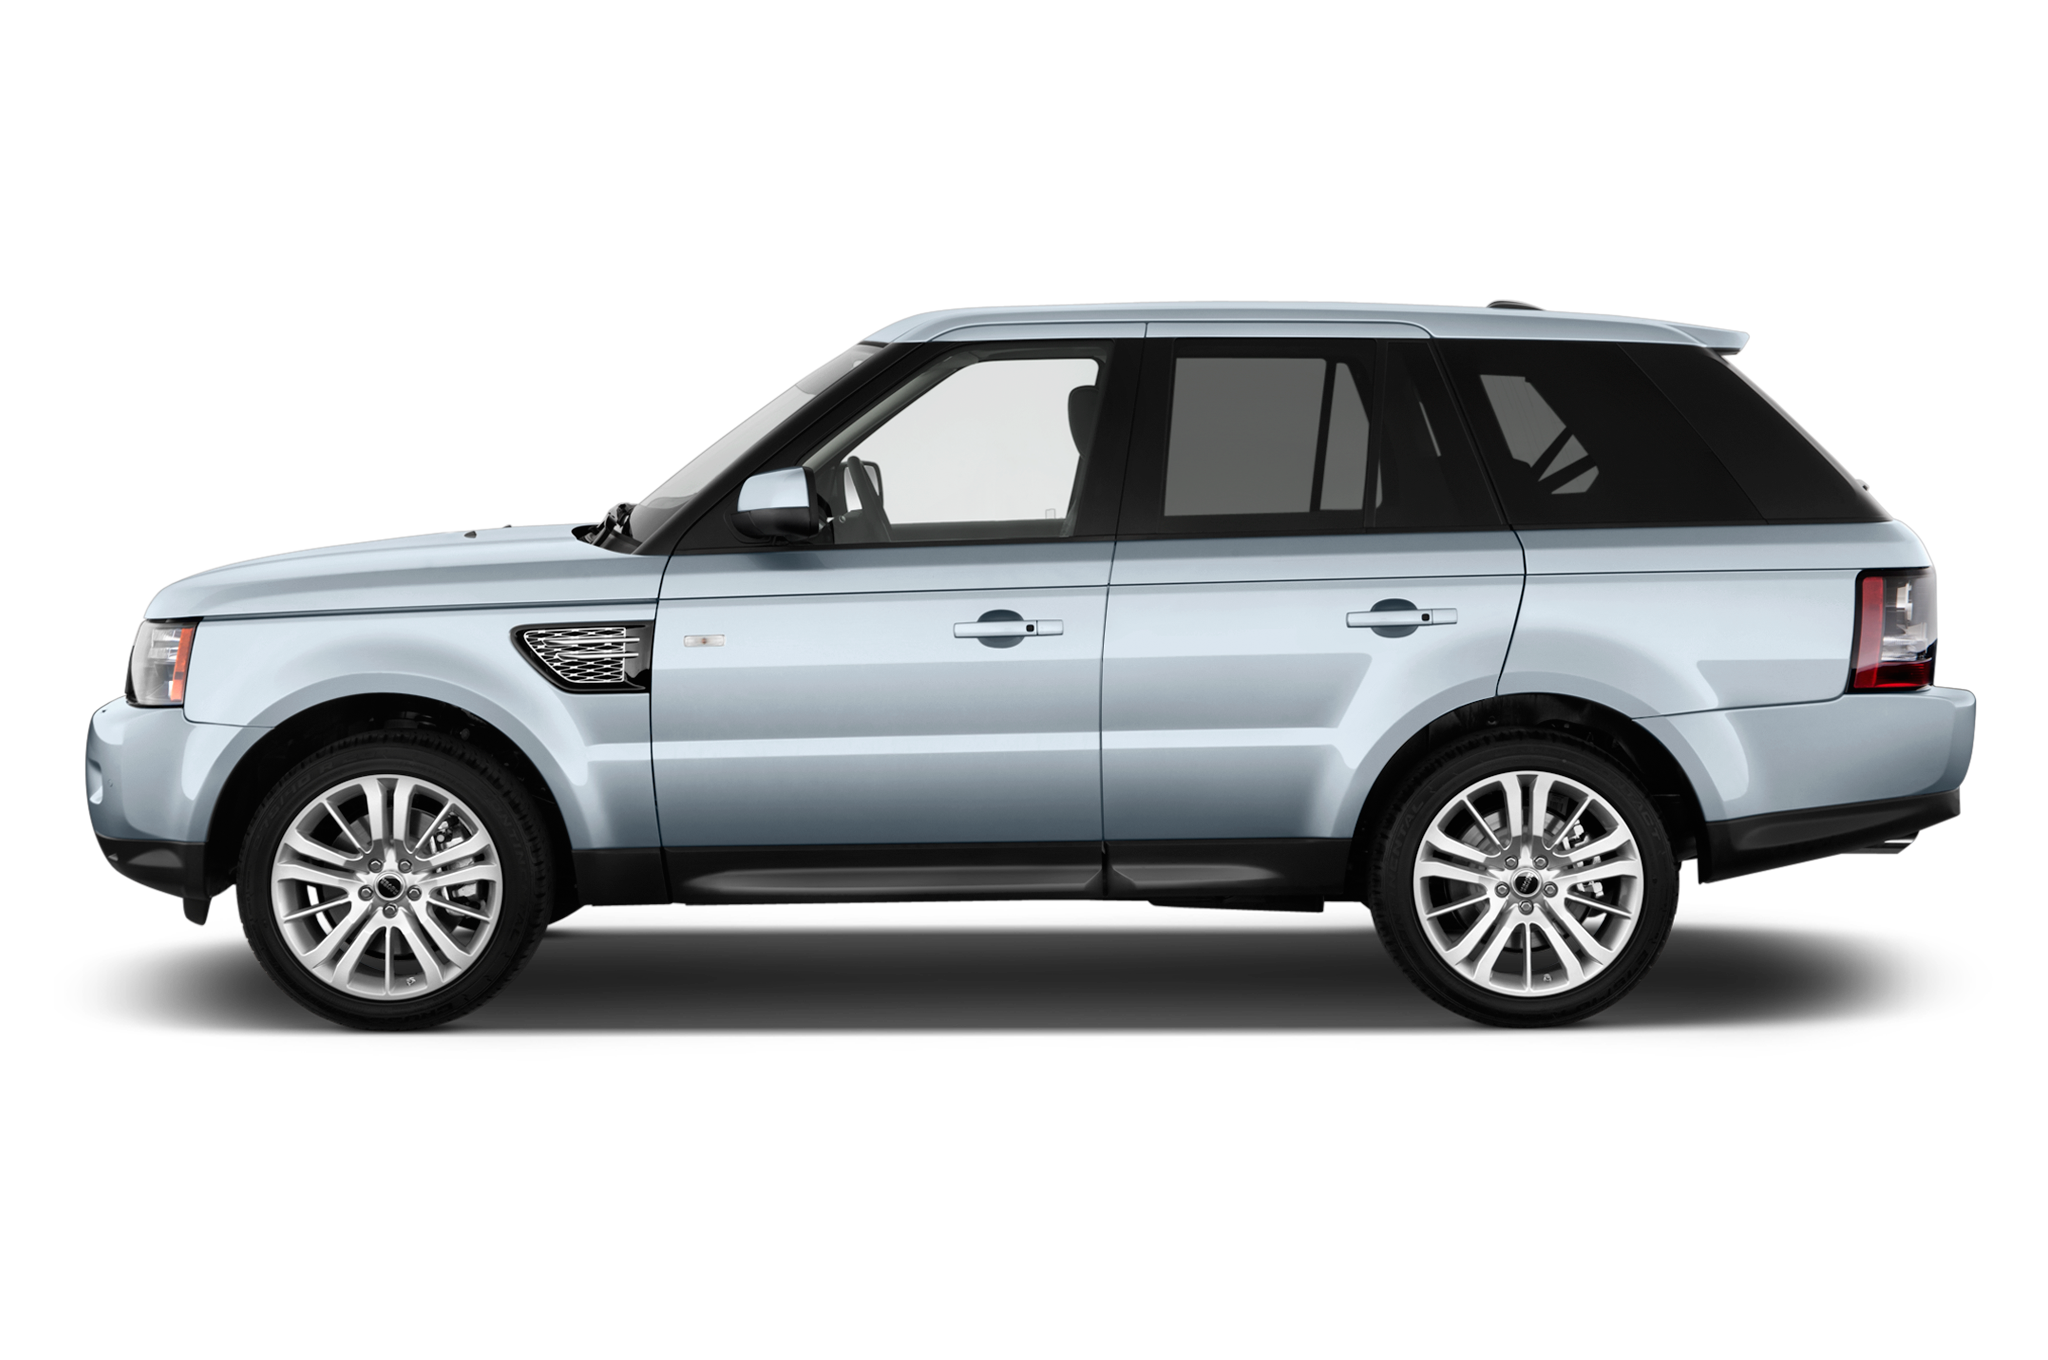 Land Rover PNG Image